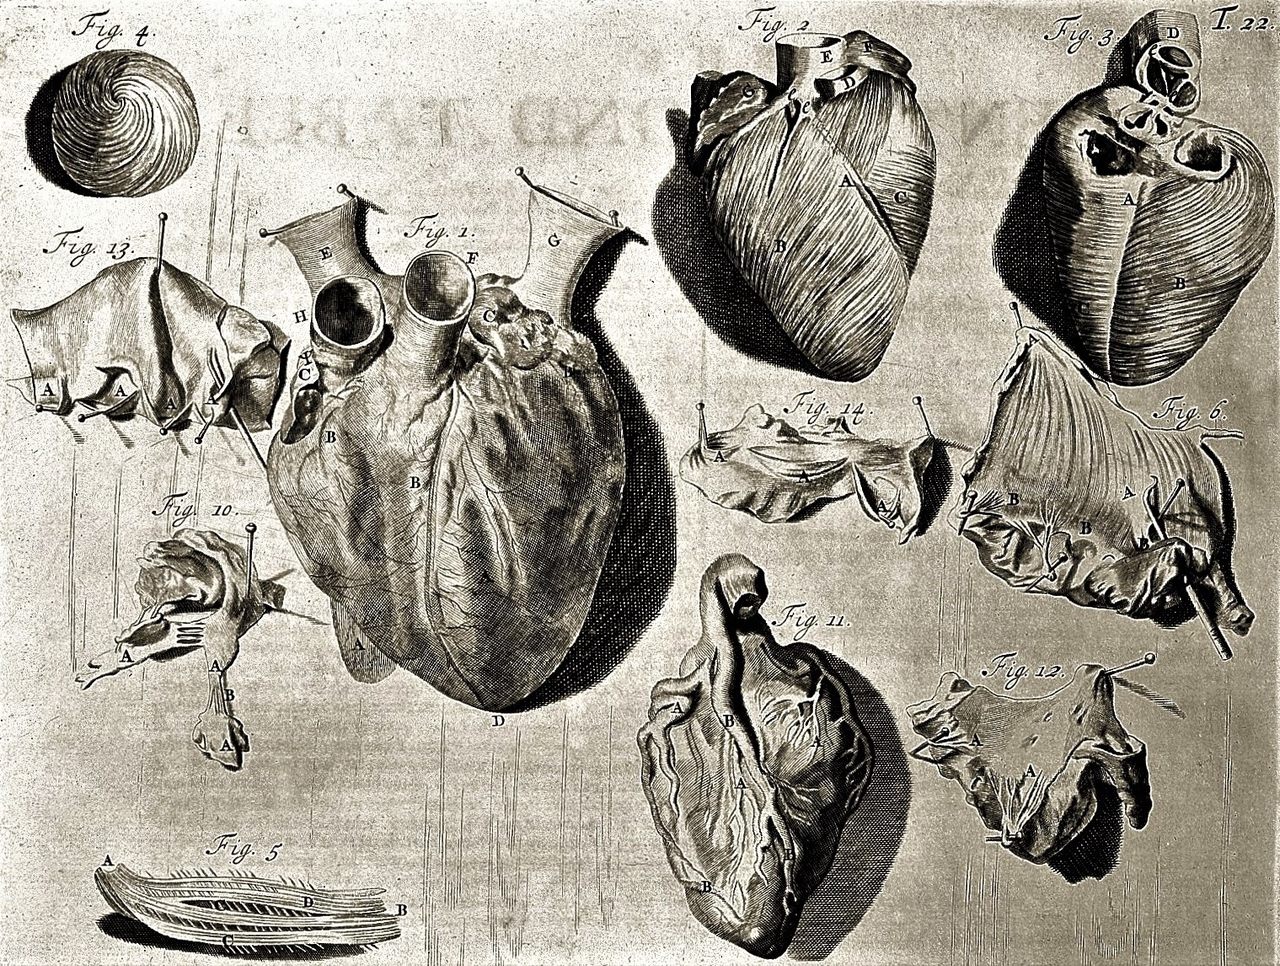 This 18th-century illustration shows a heart in various stages of dissection.